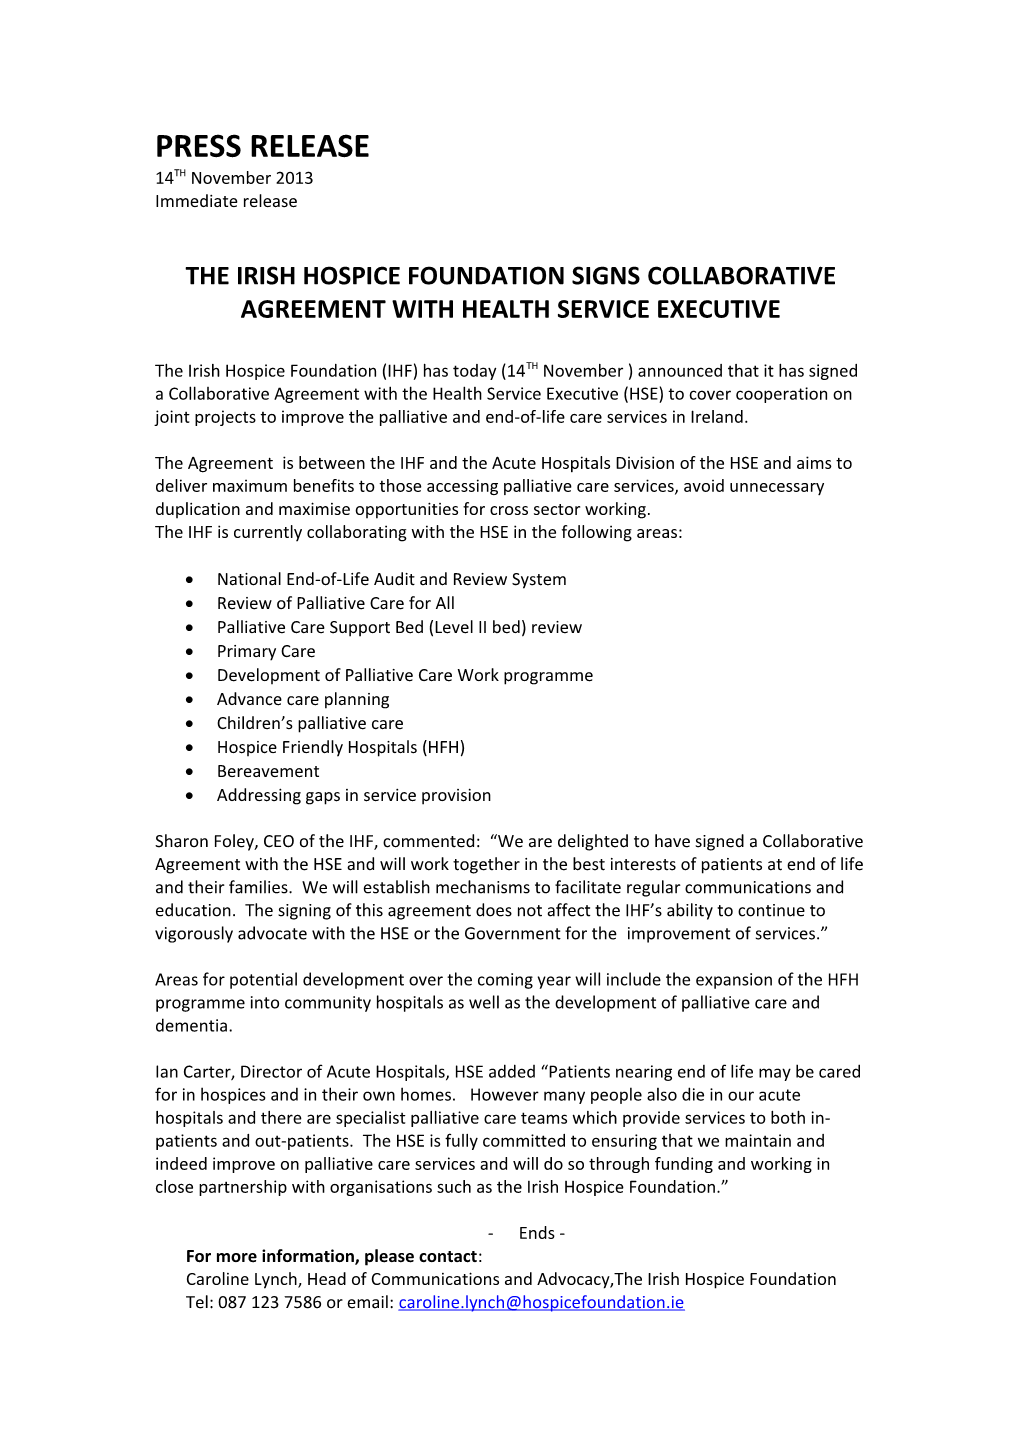 The Irish Hospice Foundation Signscollaborative Agreement with Health Service Executive